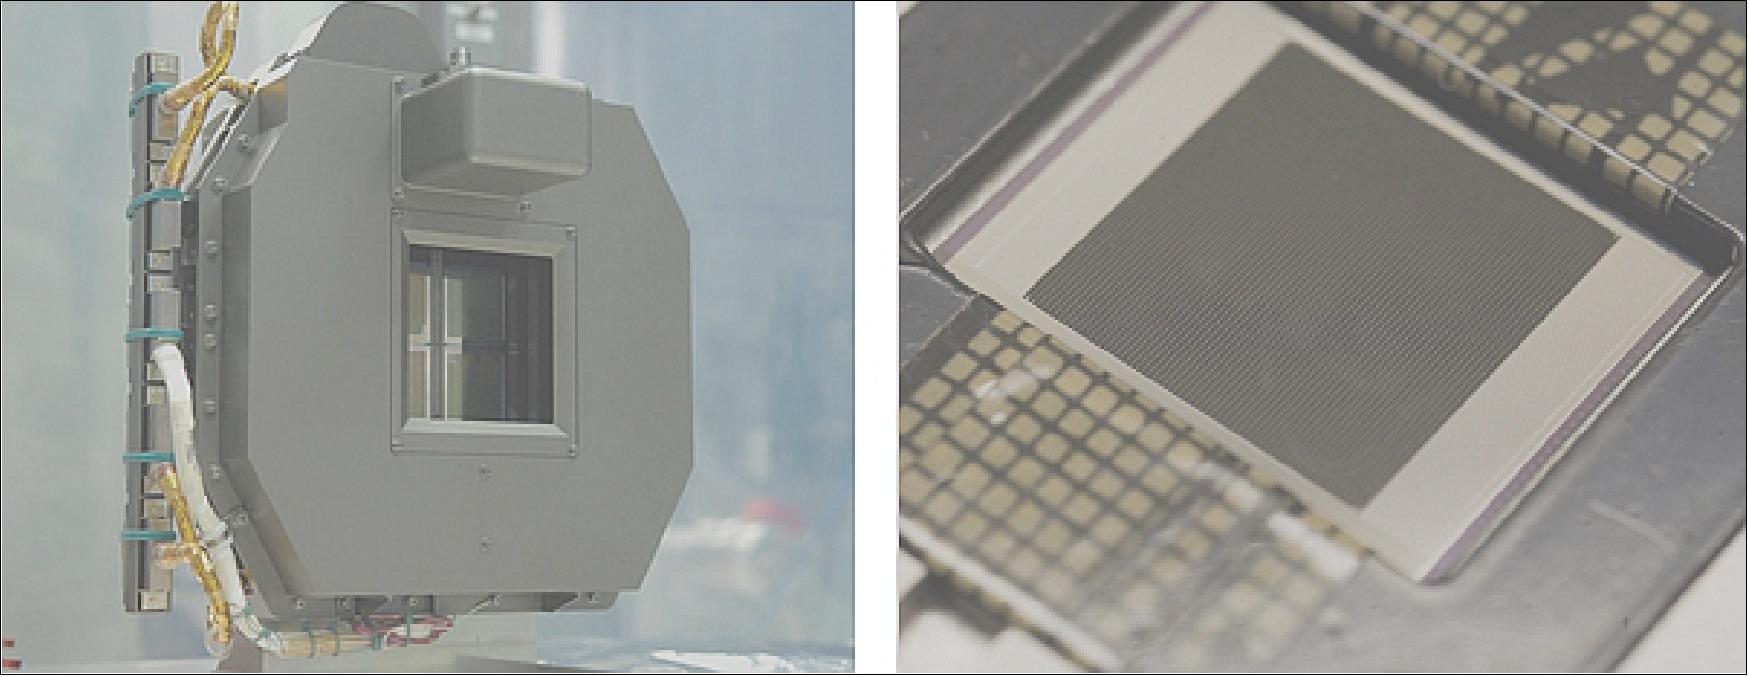 Figure 47: Left: The NIRSpec instrument micro shutters – front view. Right: The NIRSpec instrument micro shutters – rear view (image credit: NASA)